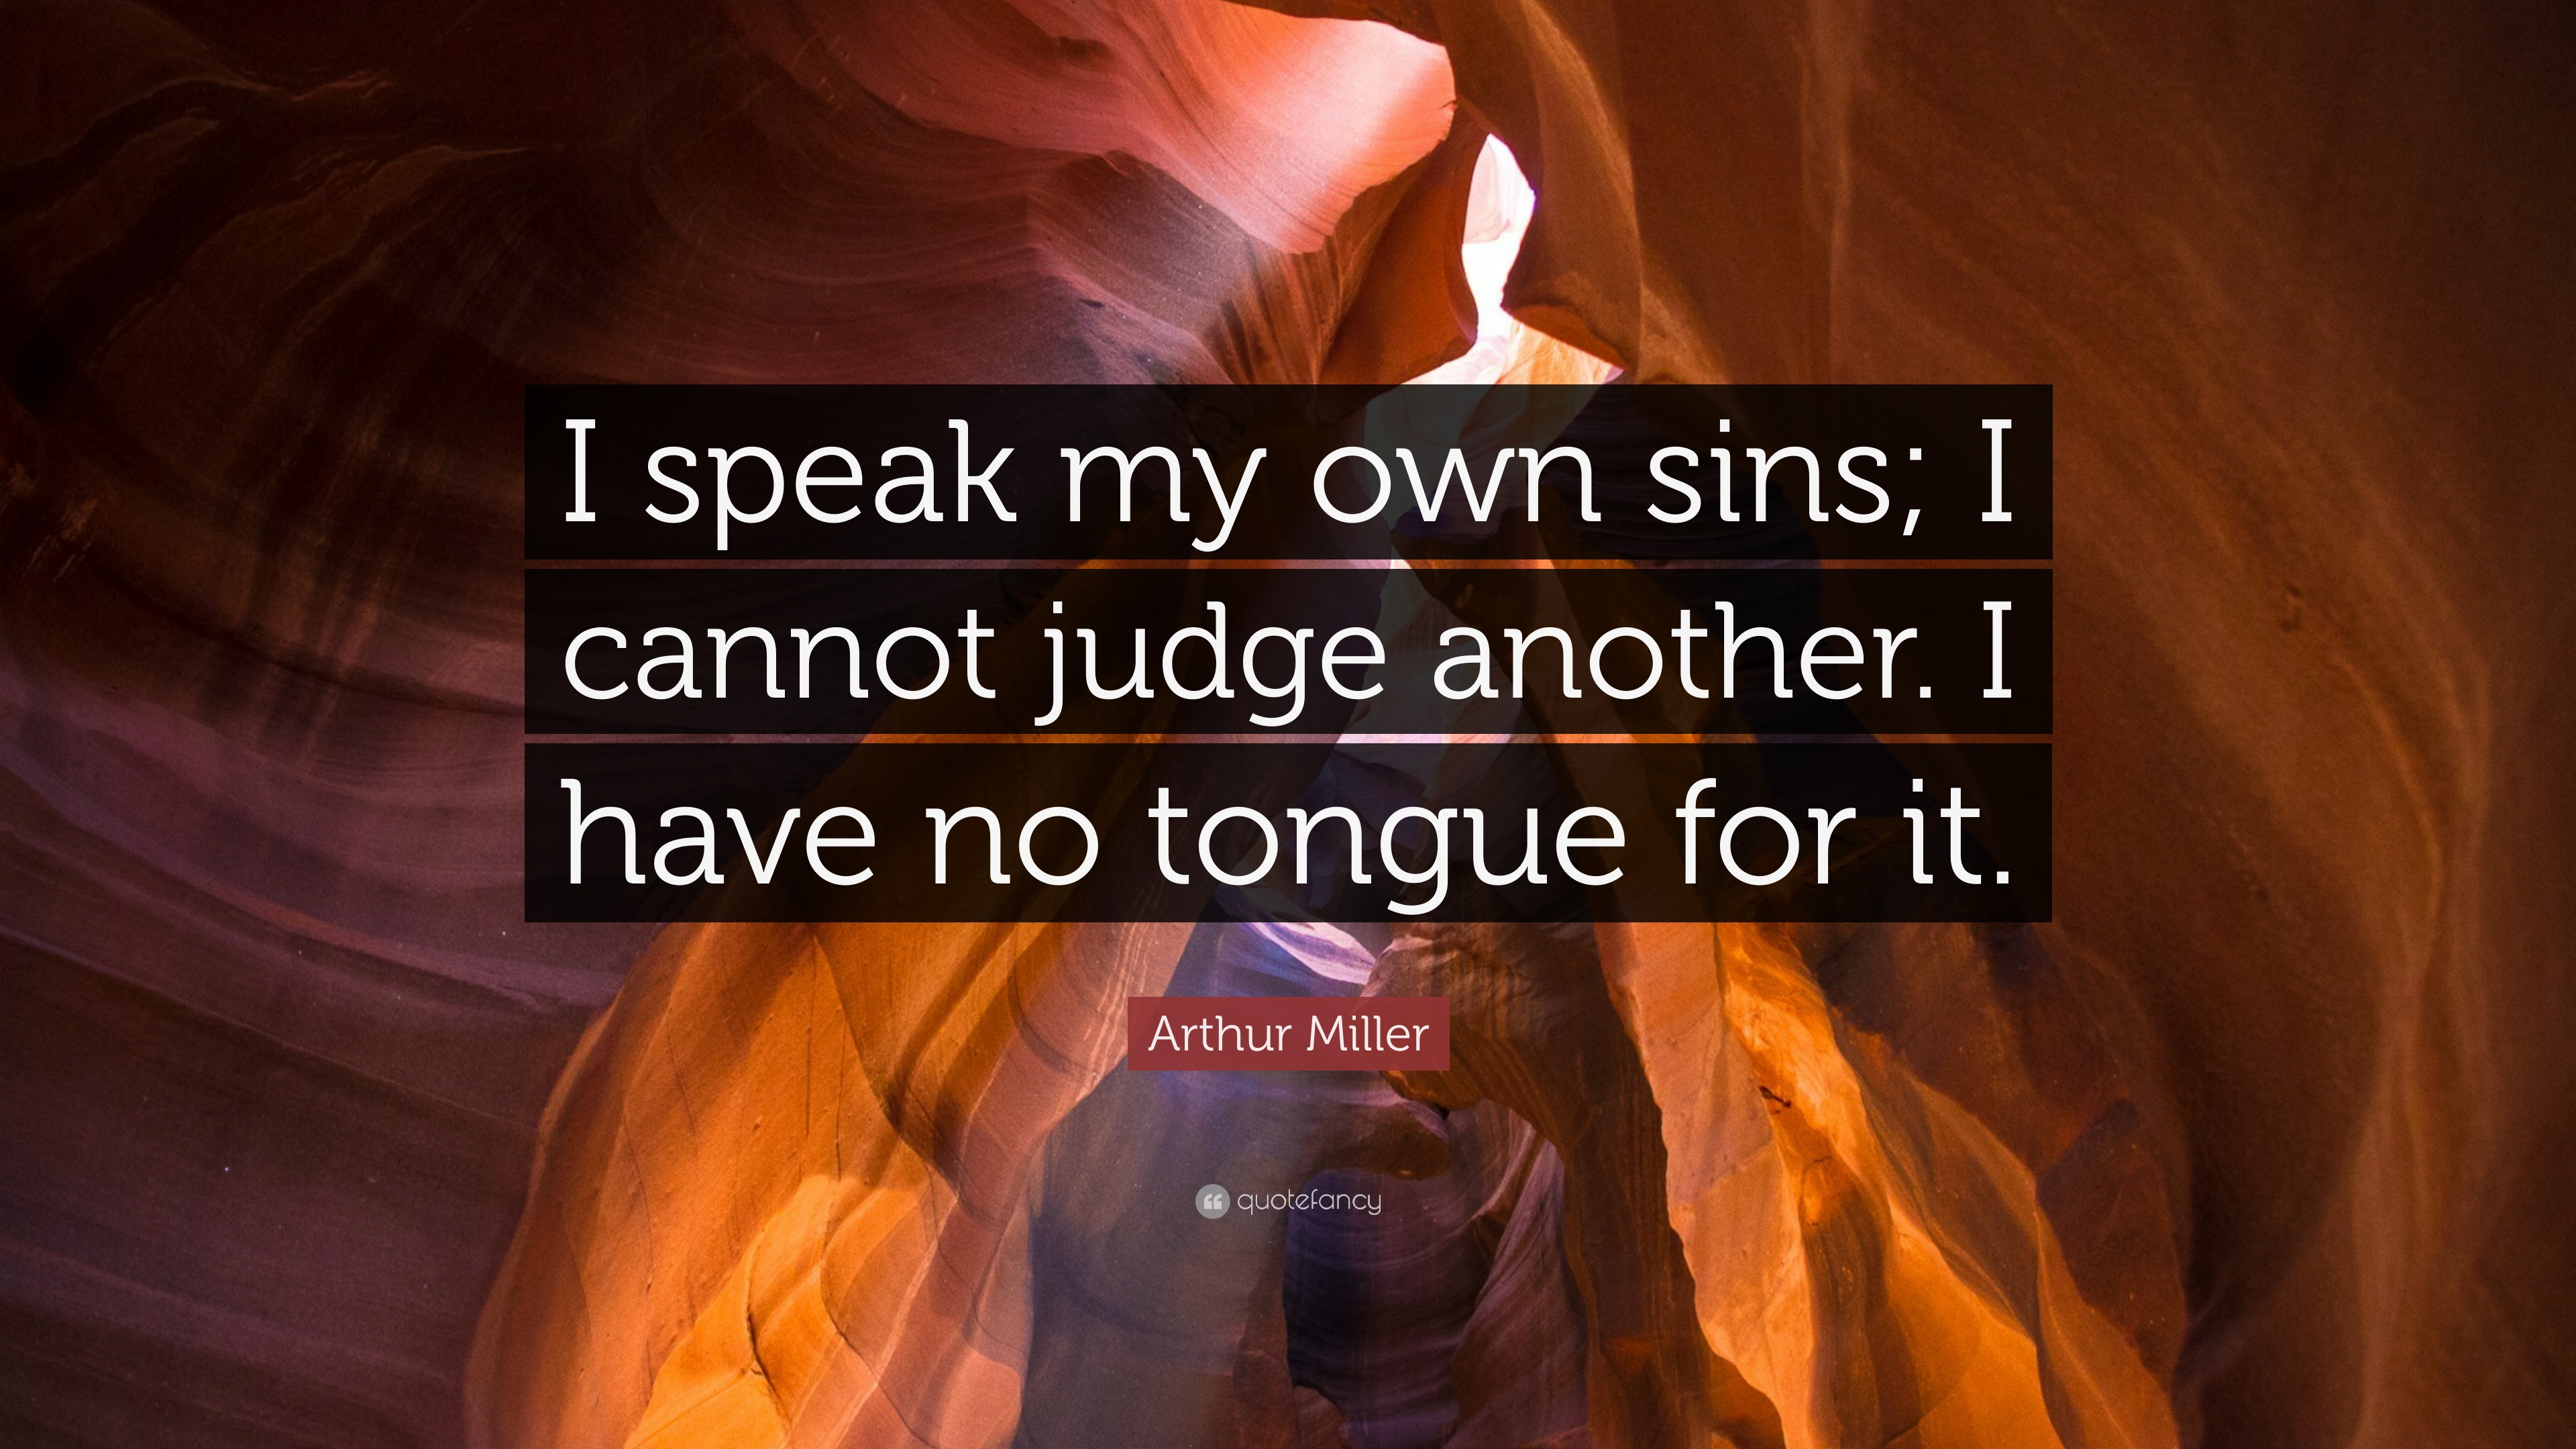 269042-Arthur-Miller-Quote-I-speak-my-own-sins-I-cannot-judge-another-I